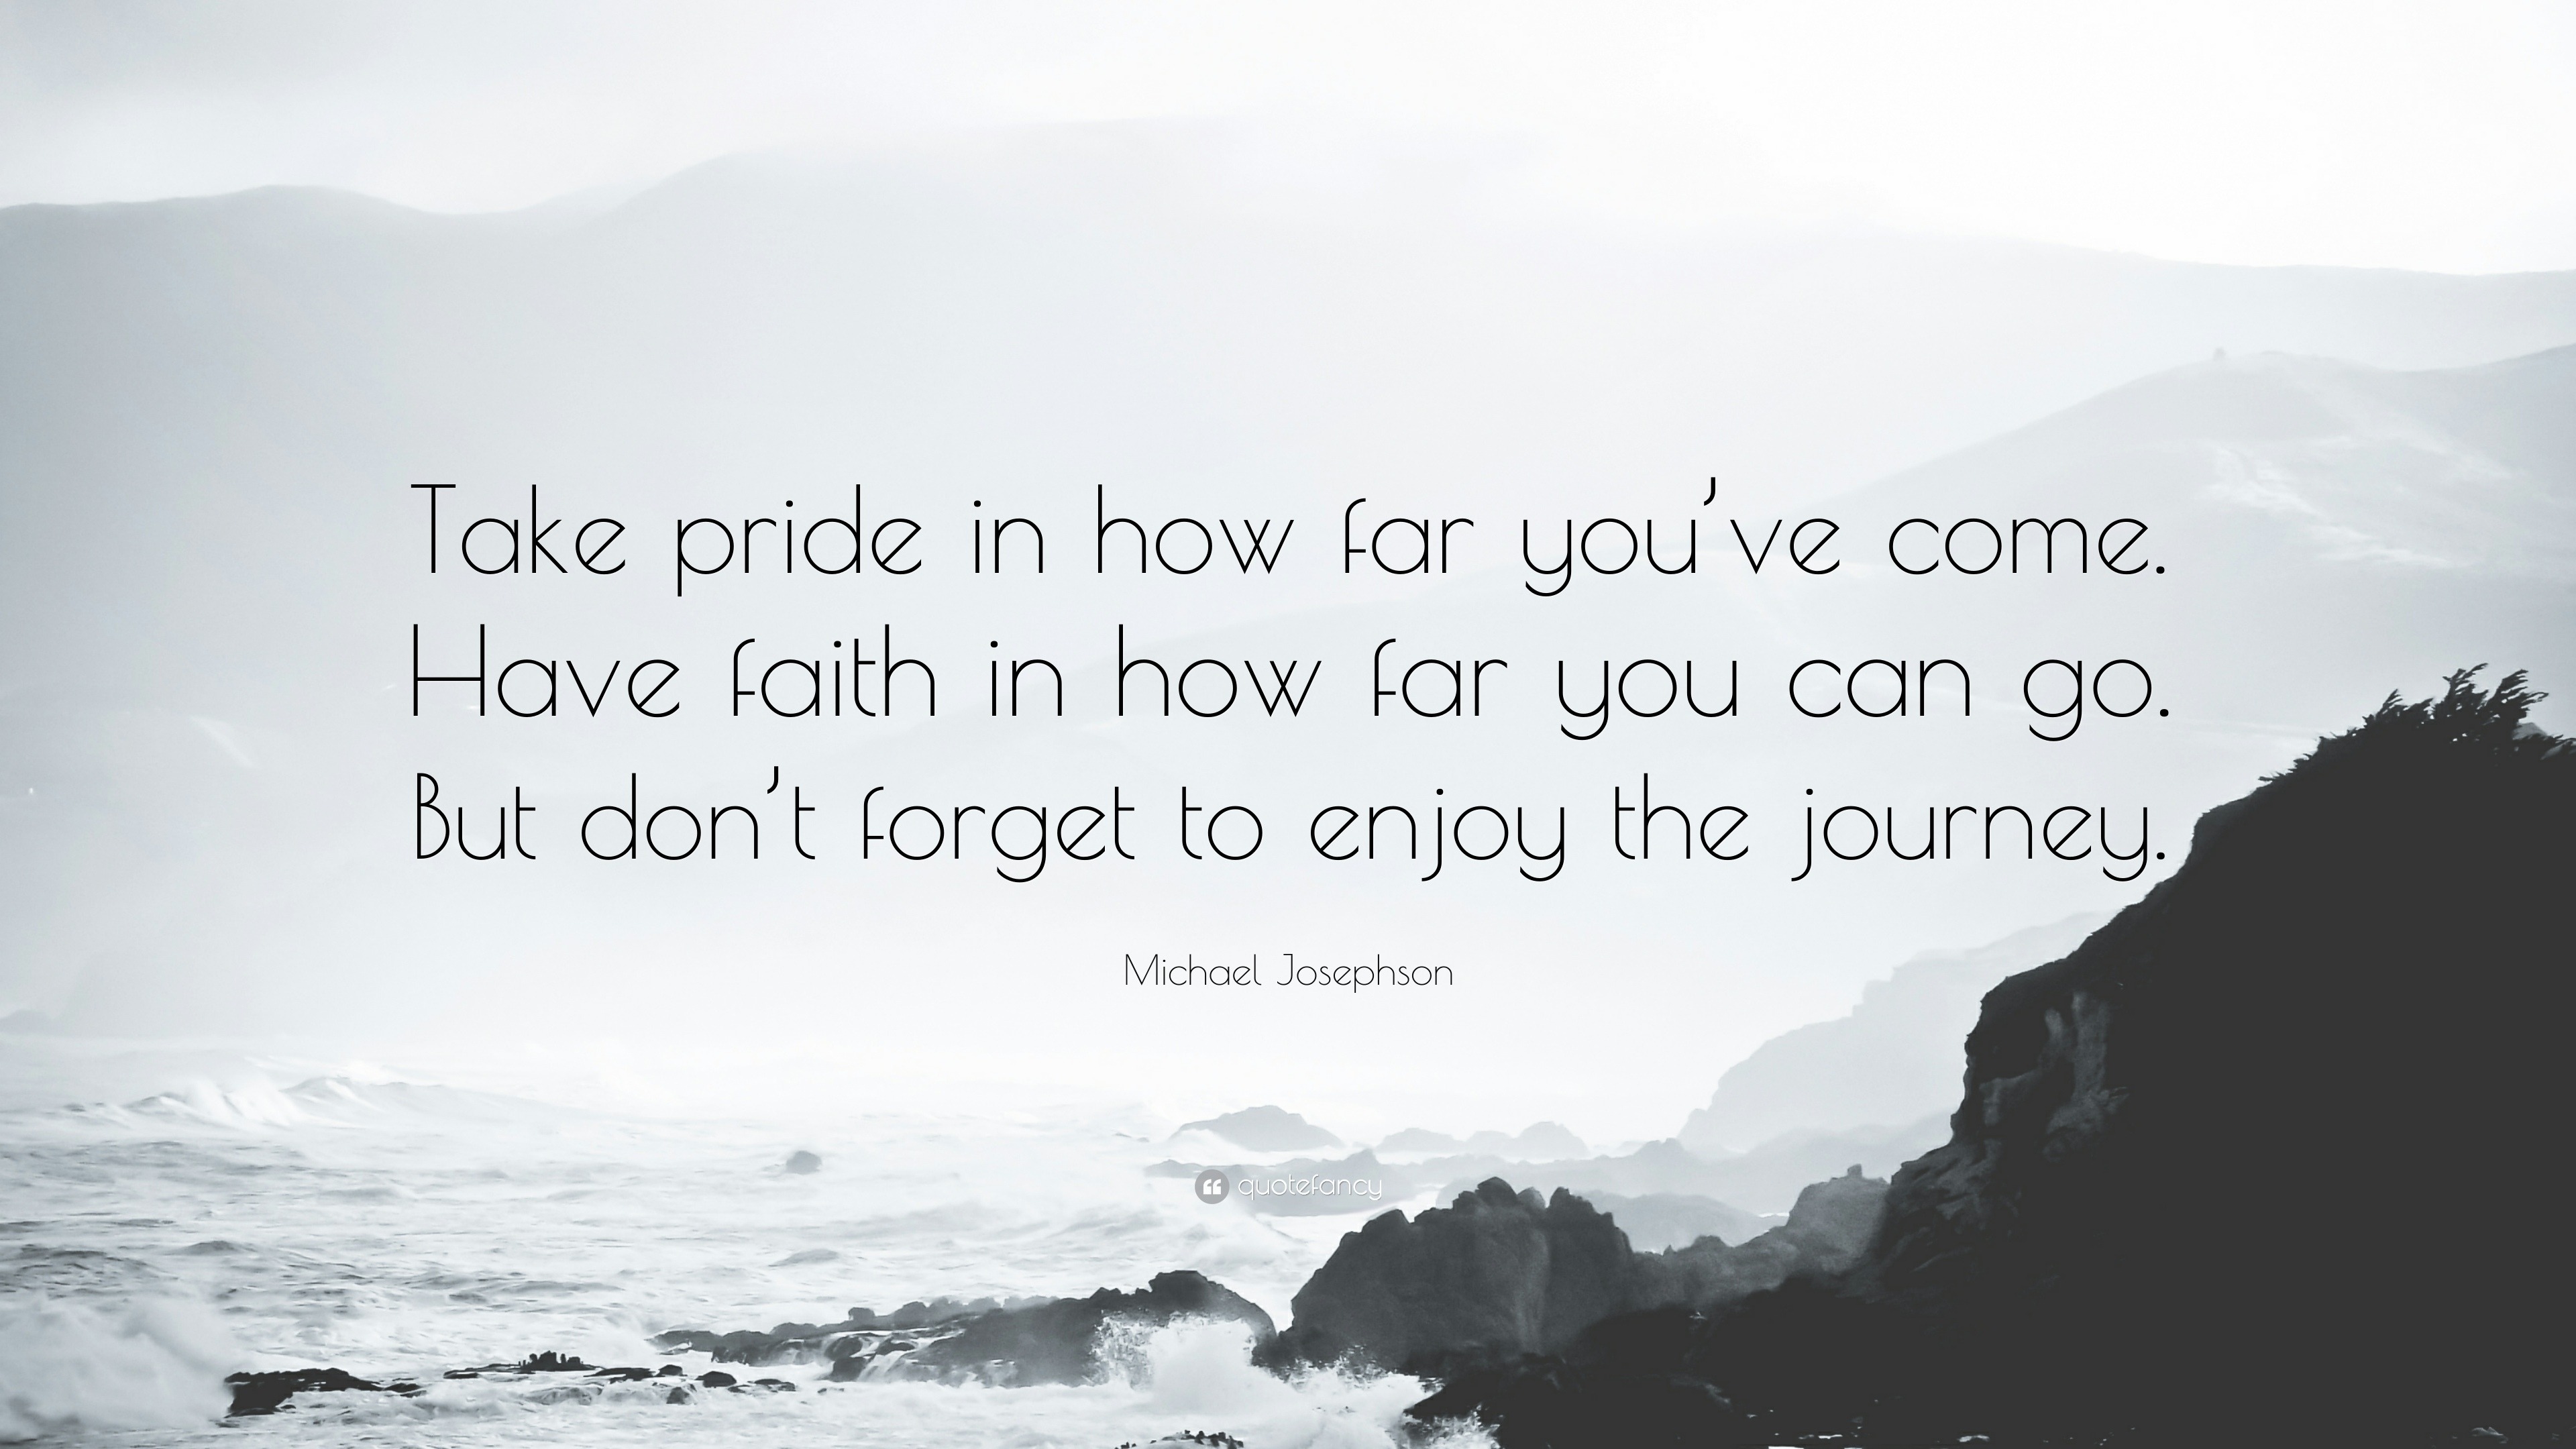 Afbeeldingsresultaat voor take pride in how far you have come and have faith in how far you can go